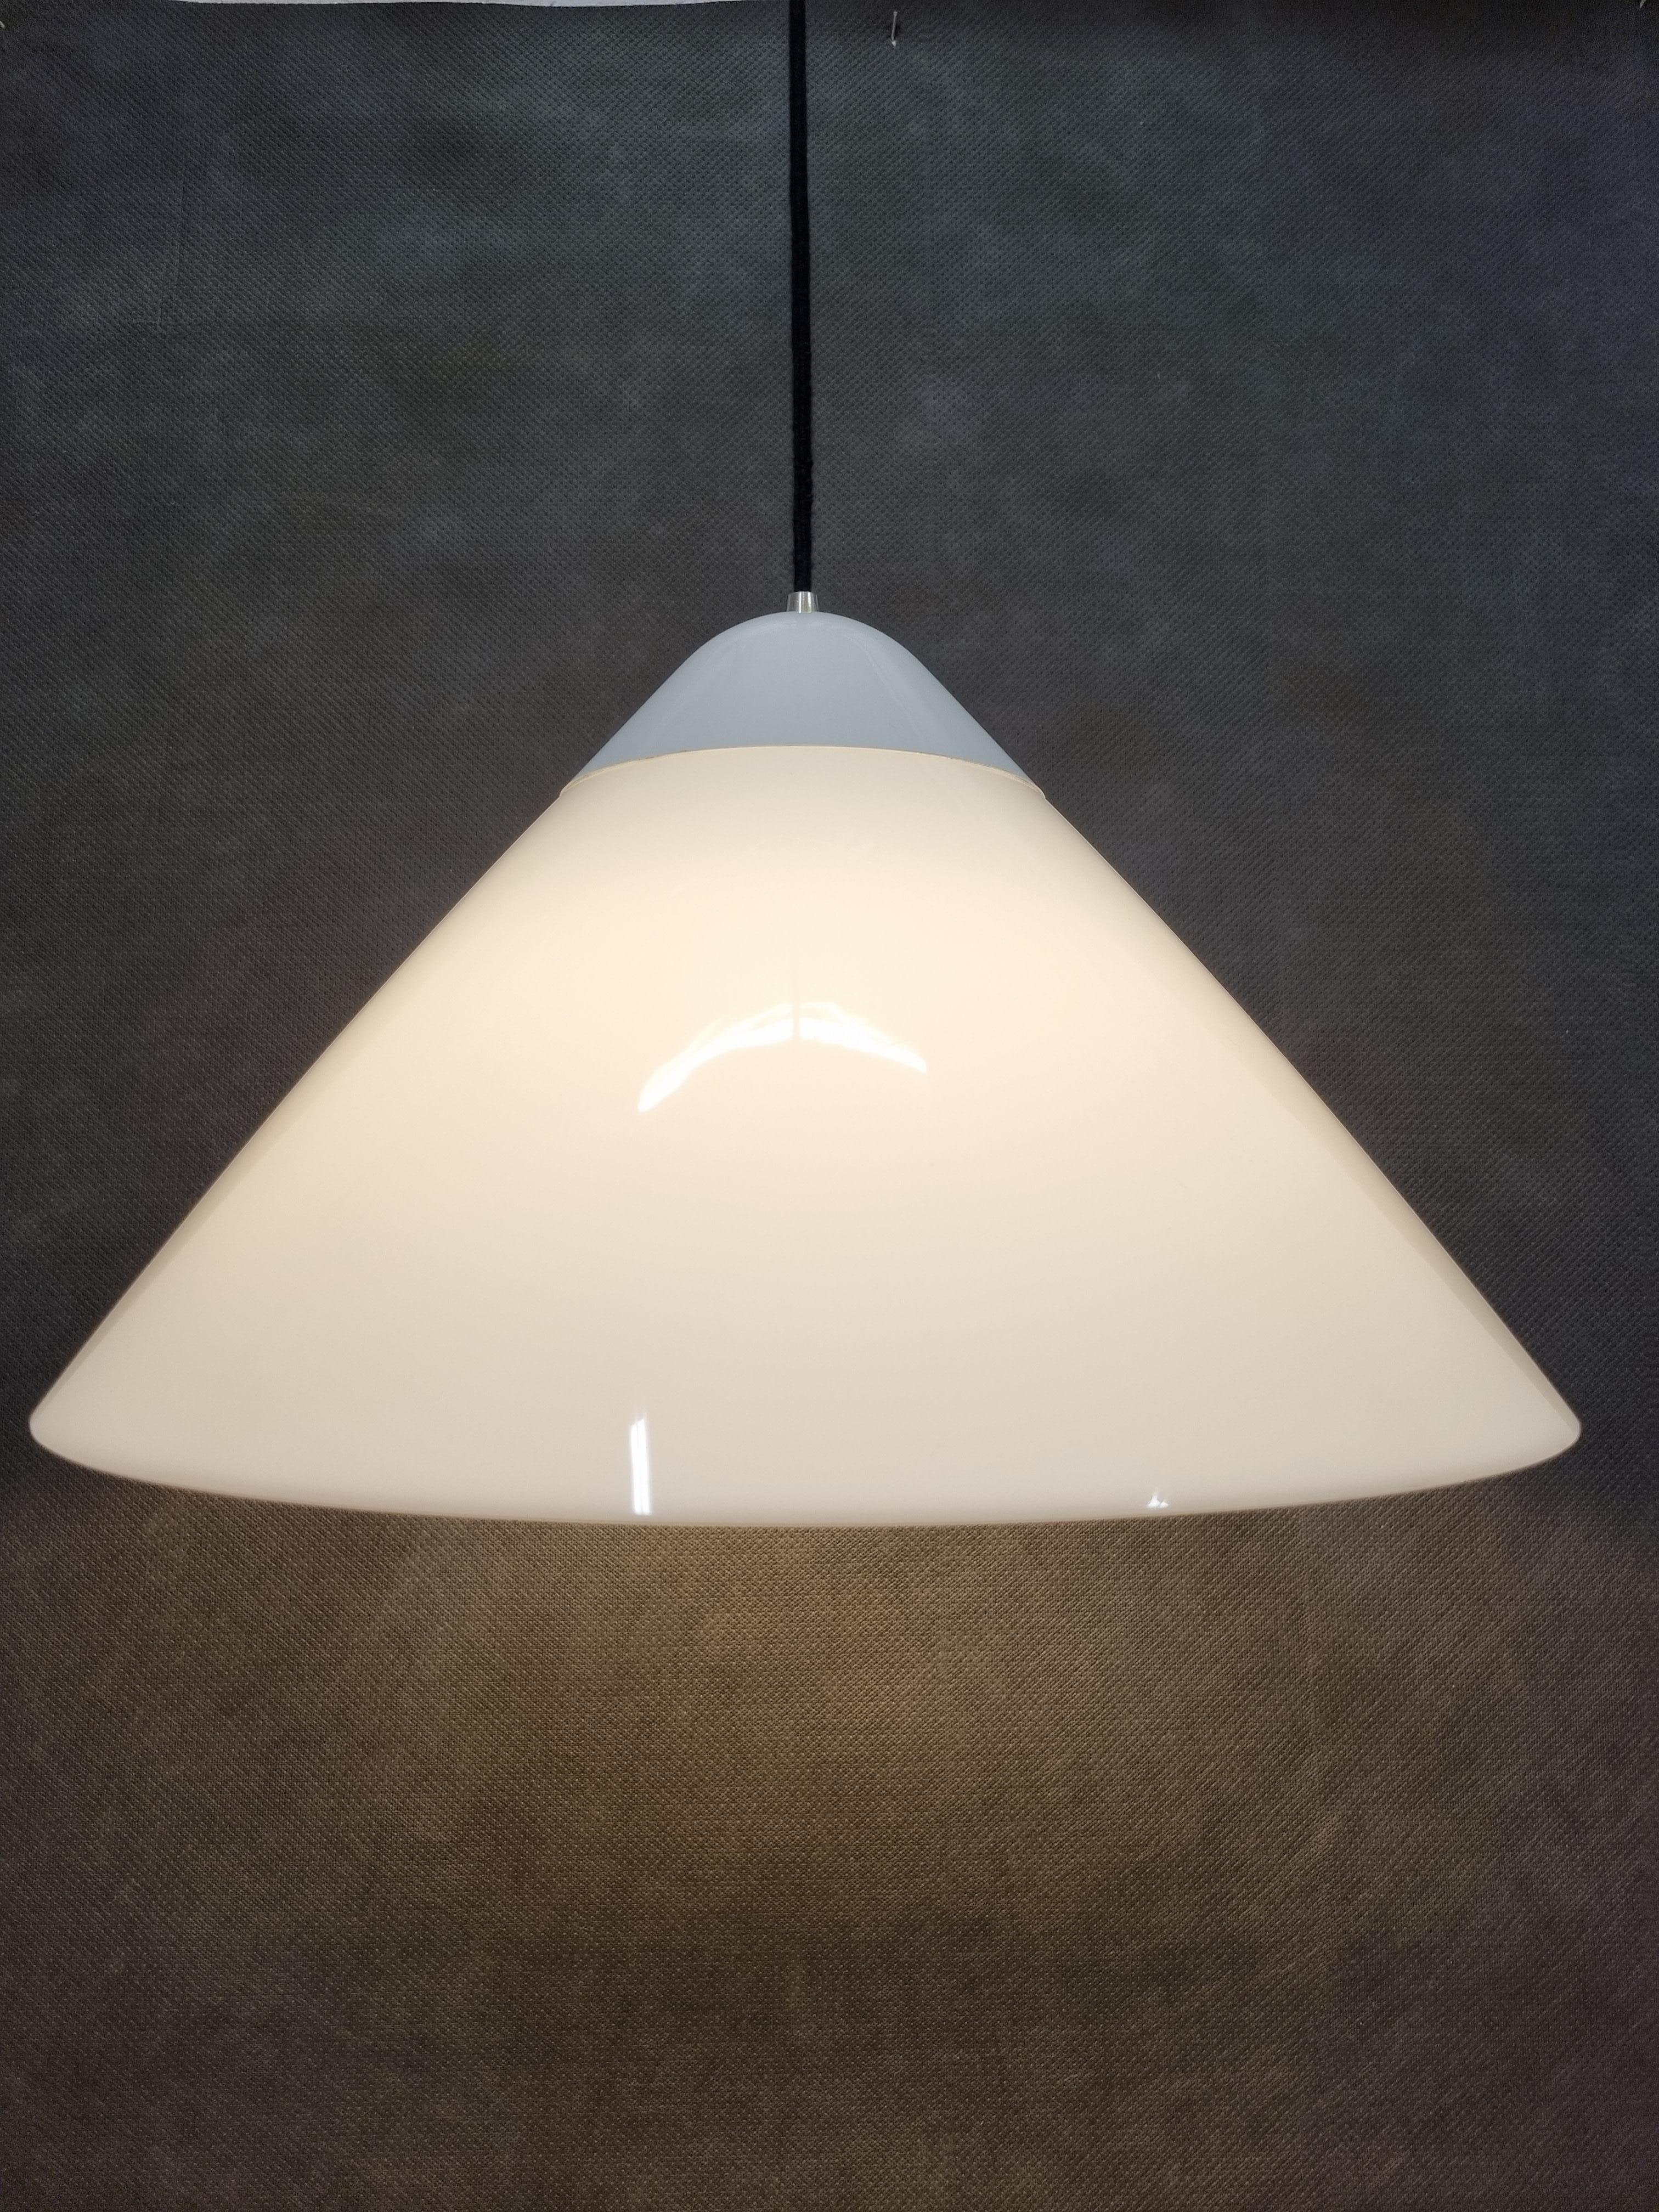 The Opala pendant lamp is produced by Louis Poulsen and Designed by Hans J. Wegner.
The lamp was originally designed for Hotel Scandinavia in Copenhagen, but it quickly became popular and could soon be seen in offices, public buildings and private